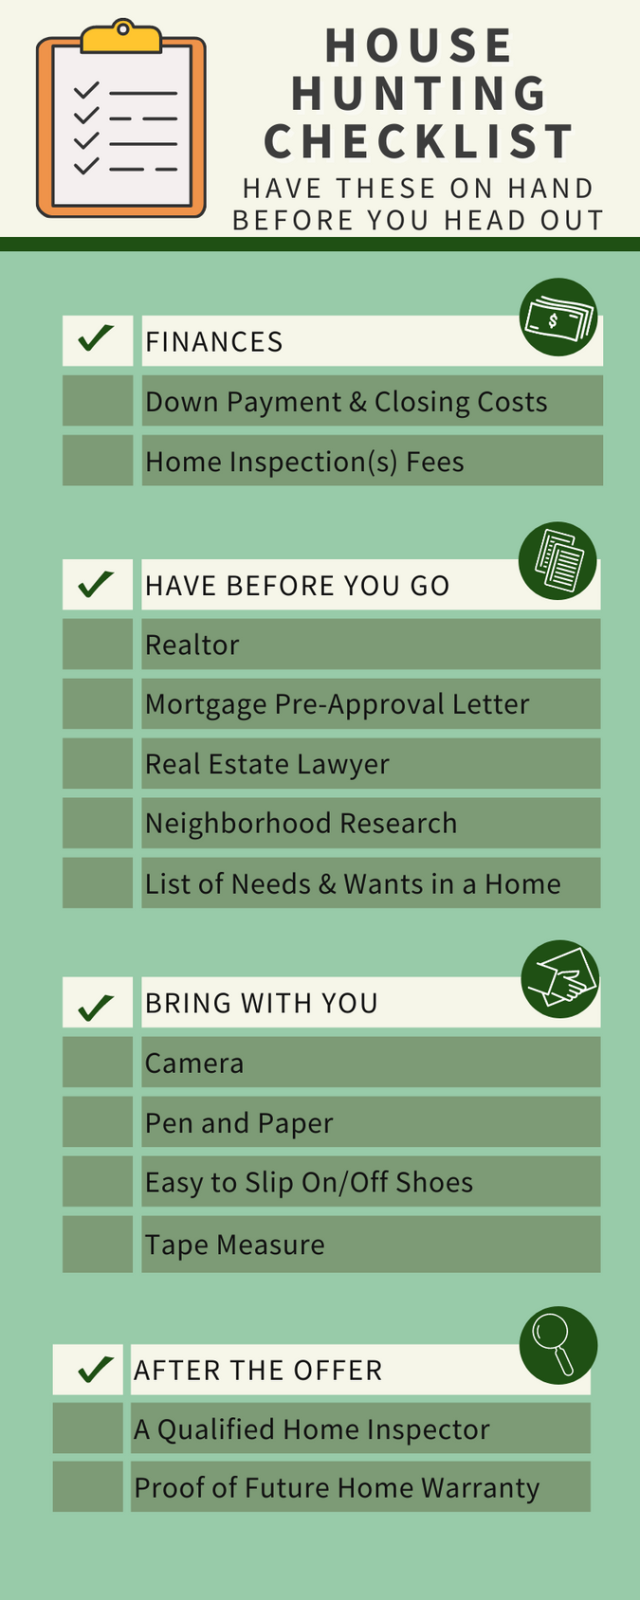 Things You Need to Buy for Your New Home: The Complete Checklist